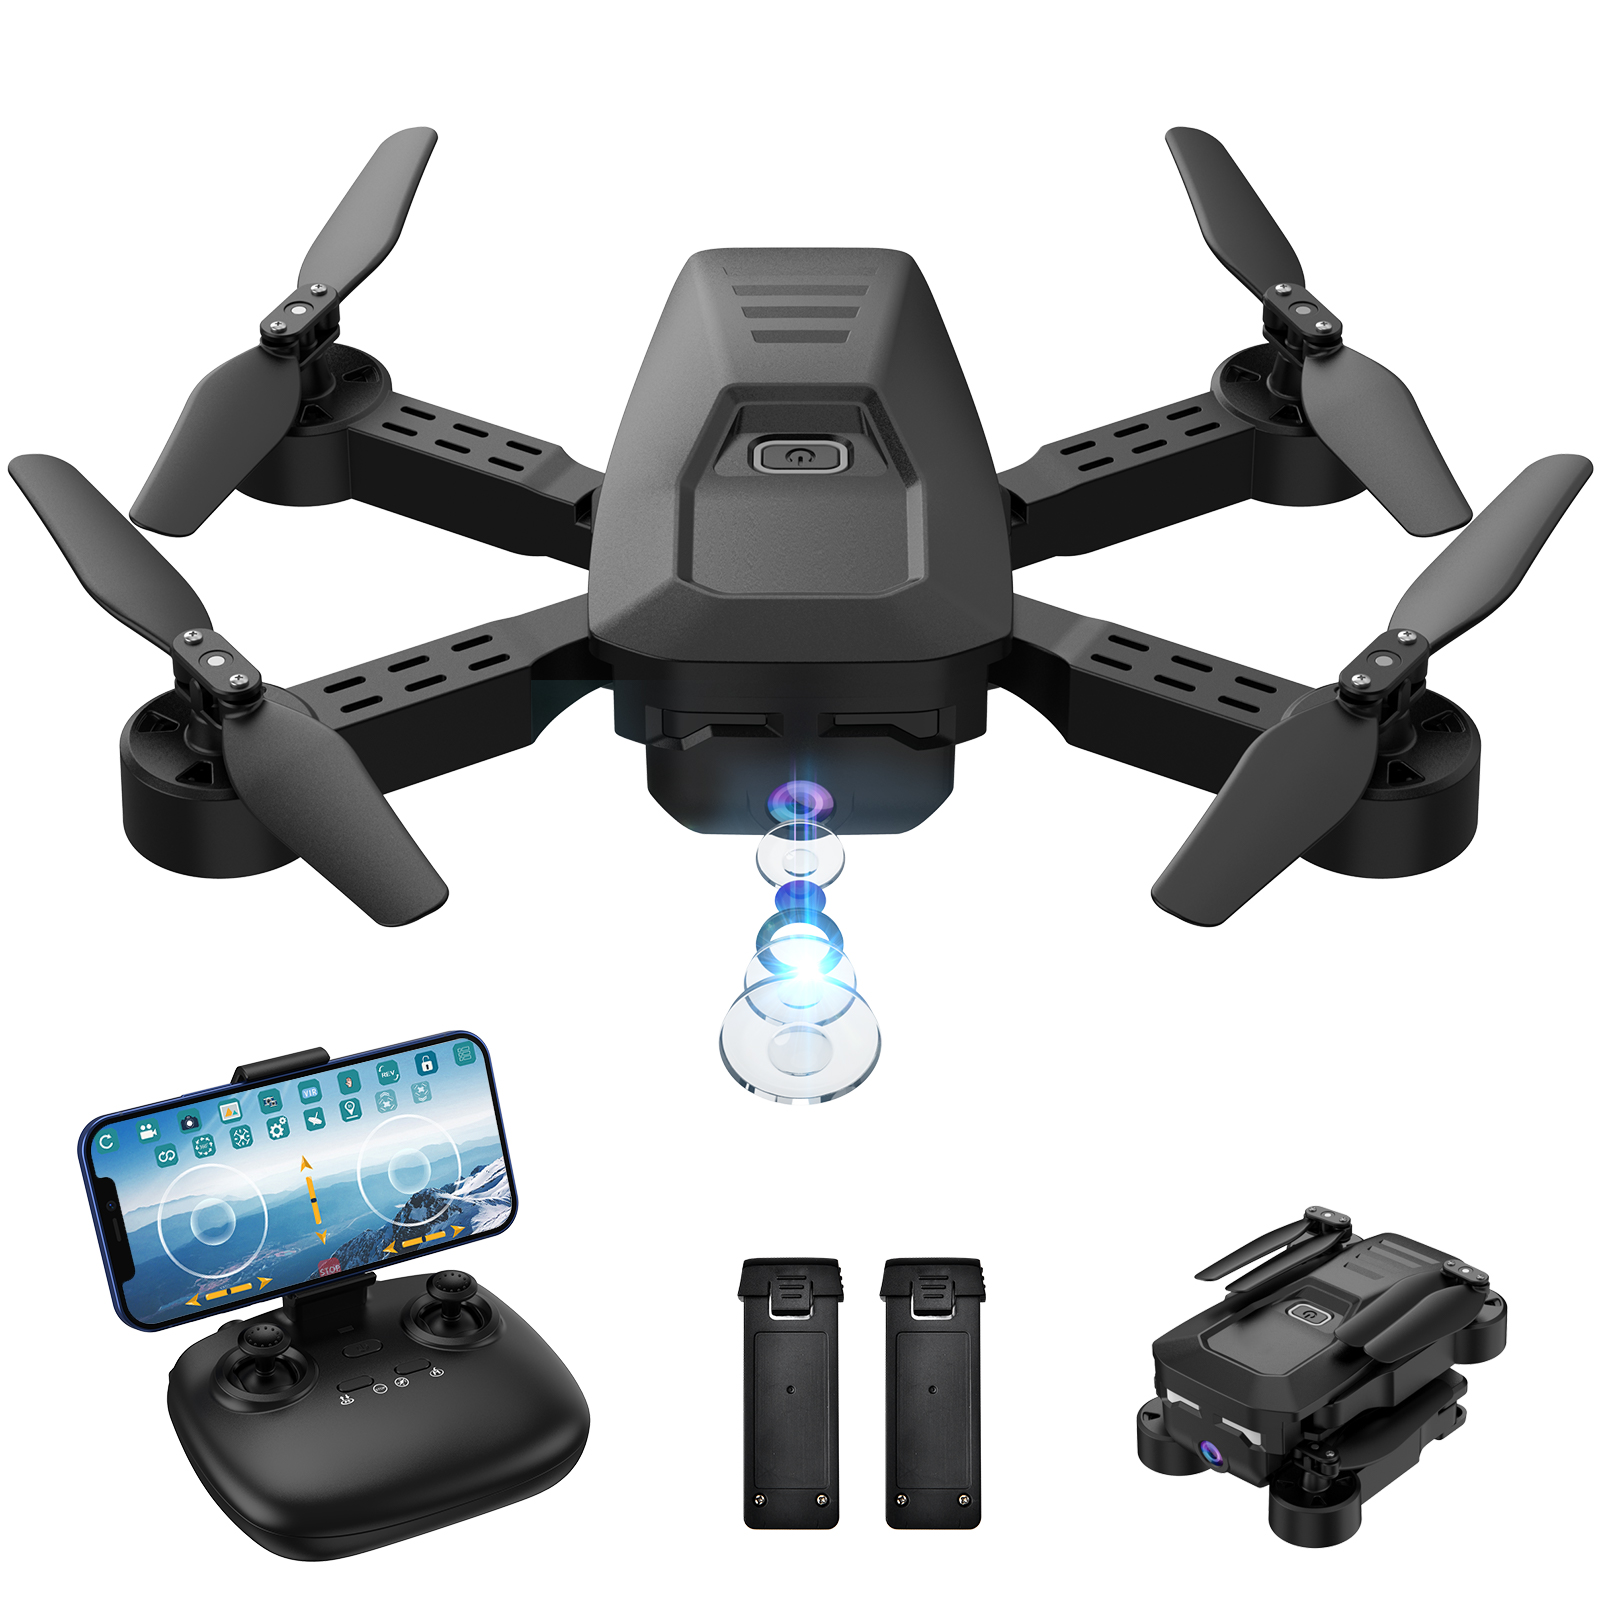 RC Quadcopter Remote Control Drone - ALLCACA RC Drone 6-axis Gyro Quadcopter Optical Flow Positioning Drone with Double 720P HD Cameras, Altitude Hold, Headless Mode and 360° Flip, Black - image 4 of 9